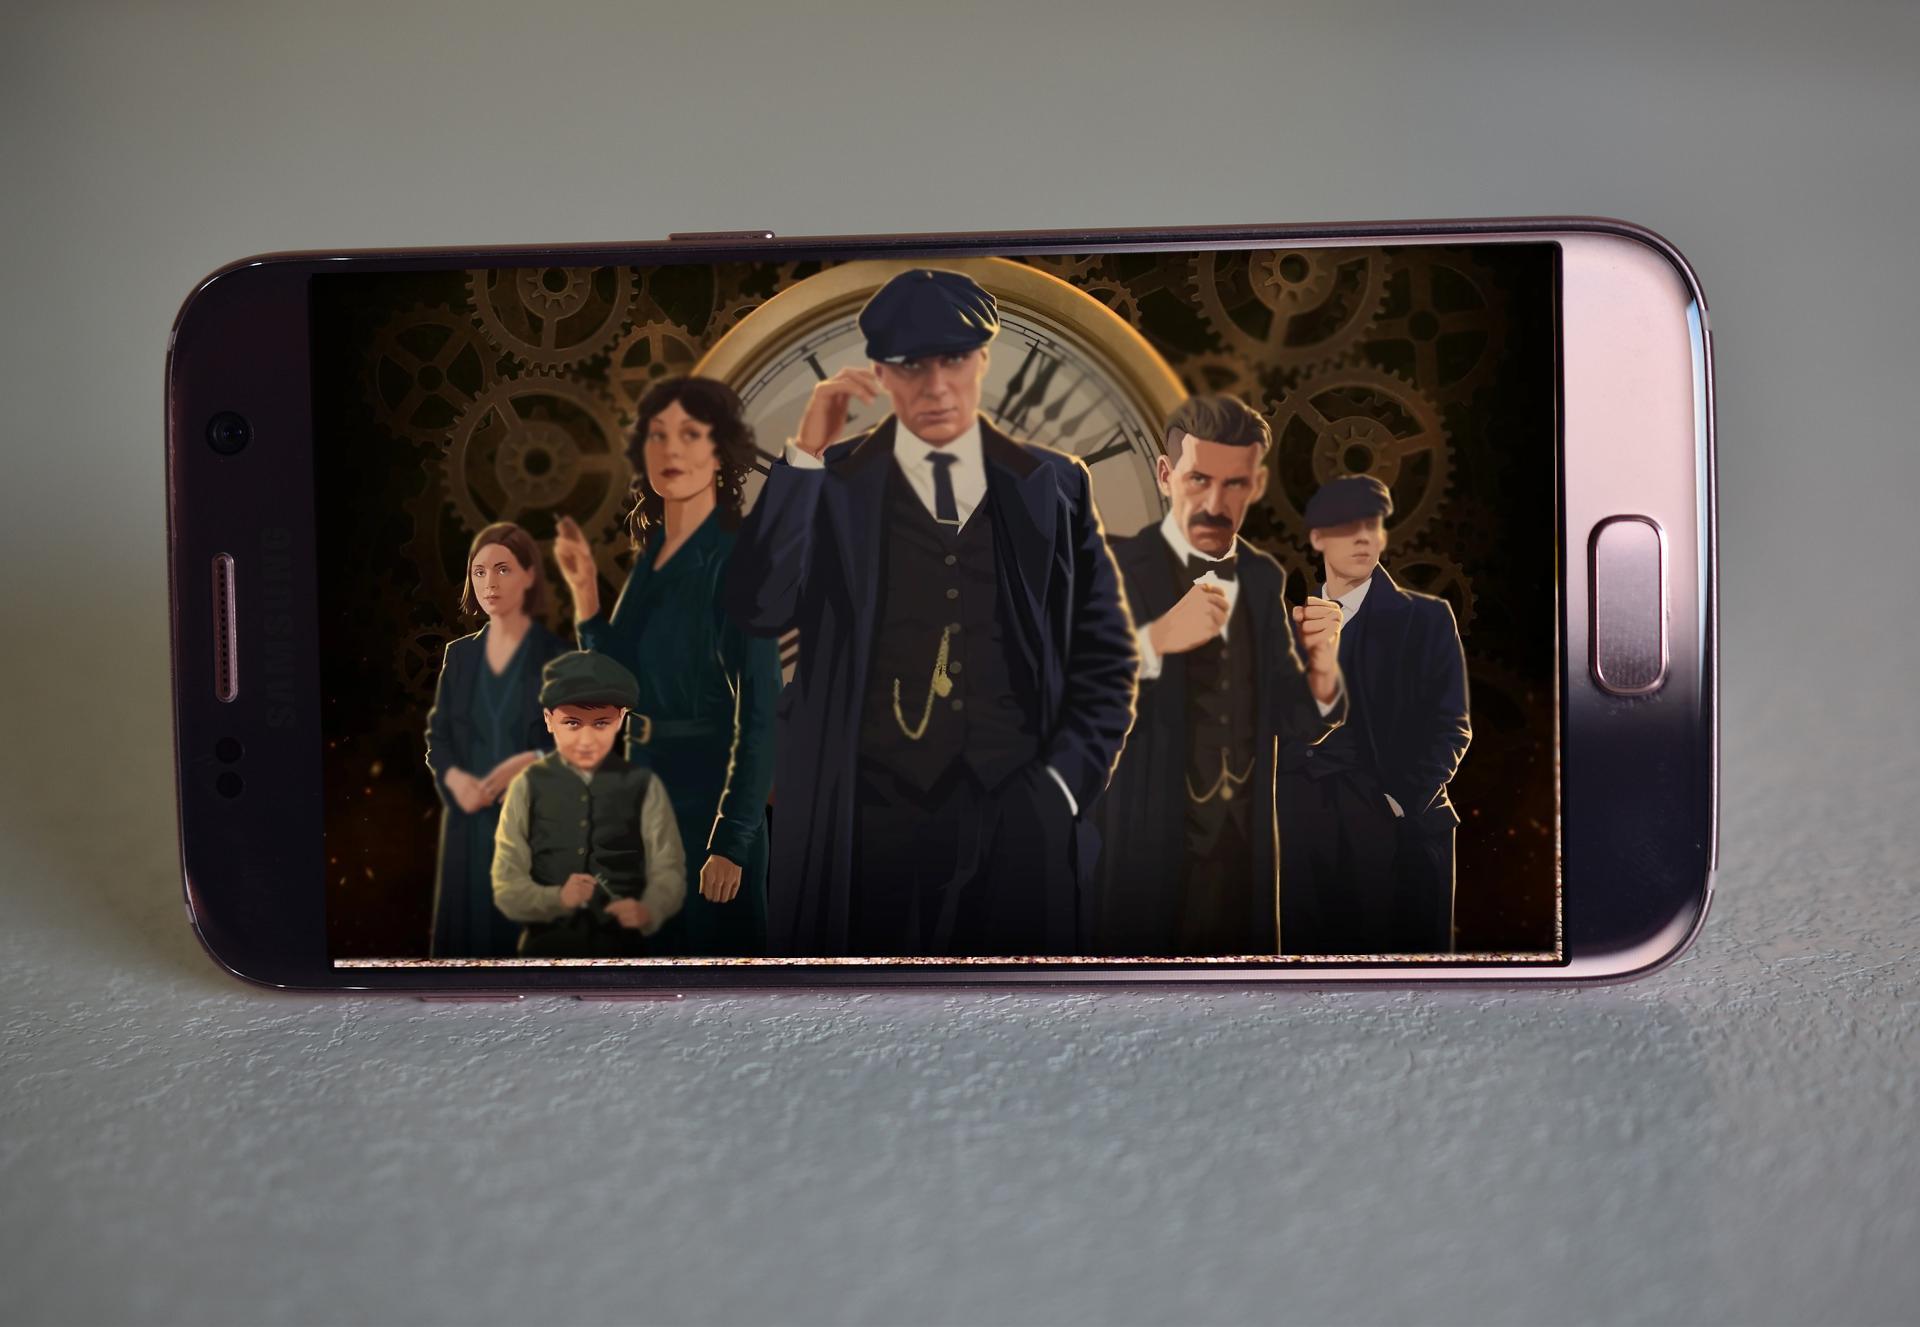 Mastermind Peaky Blinders For Android Apk Download - download roblox 2 448 411159 apk for android free